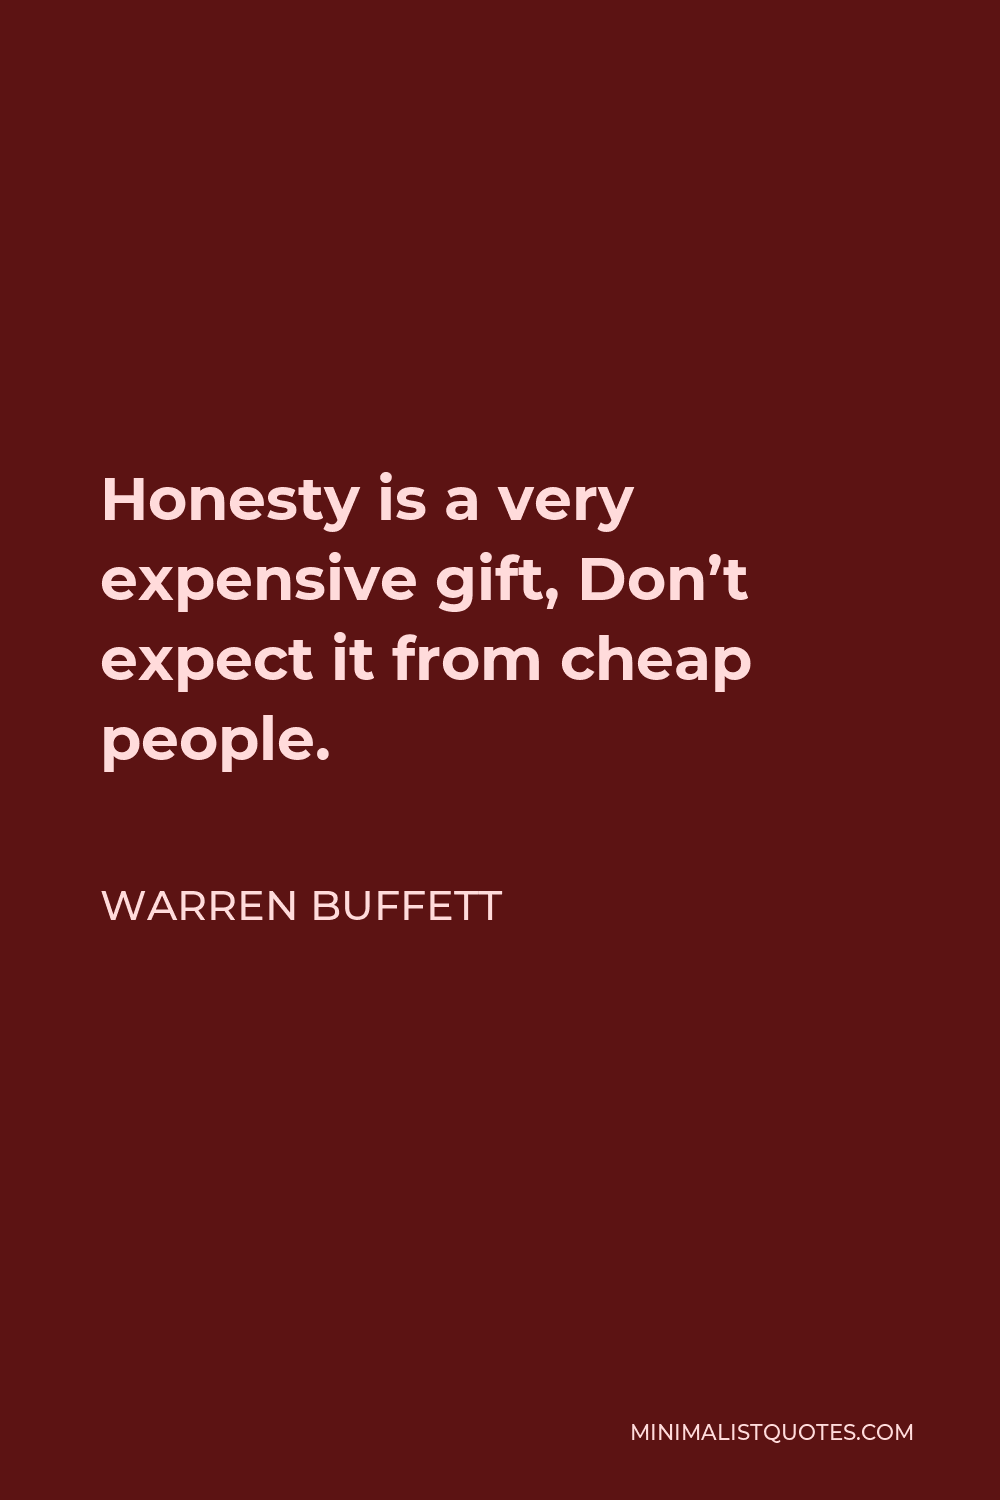 L2 India bloggers : Honesty is very very expensive gift.